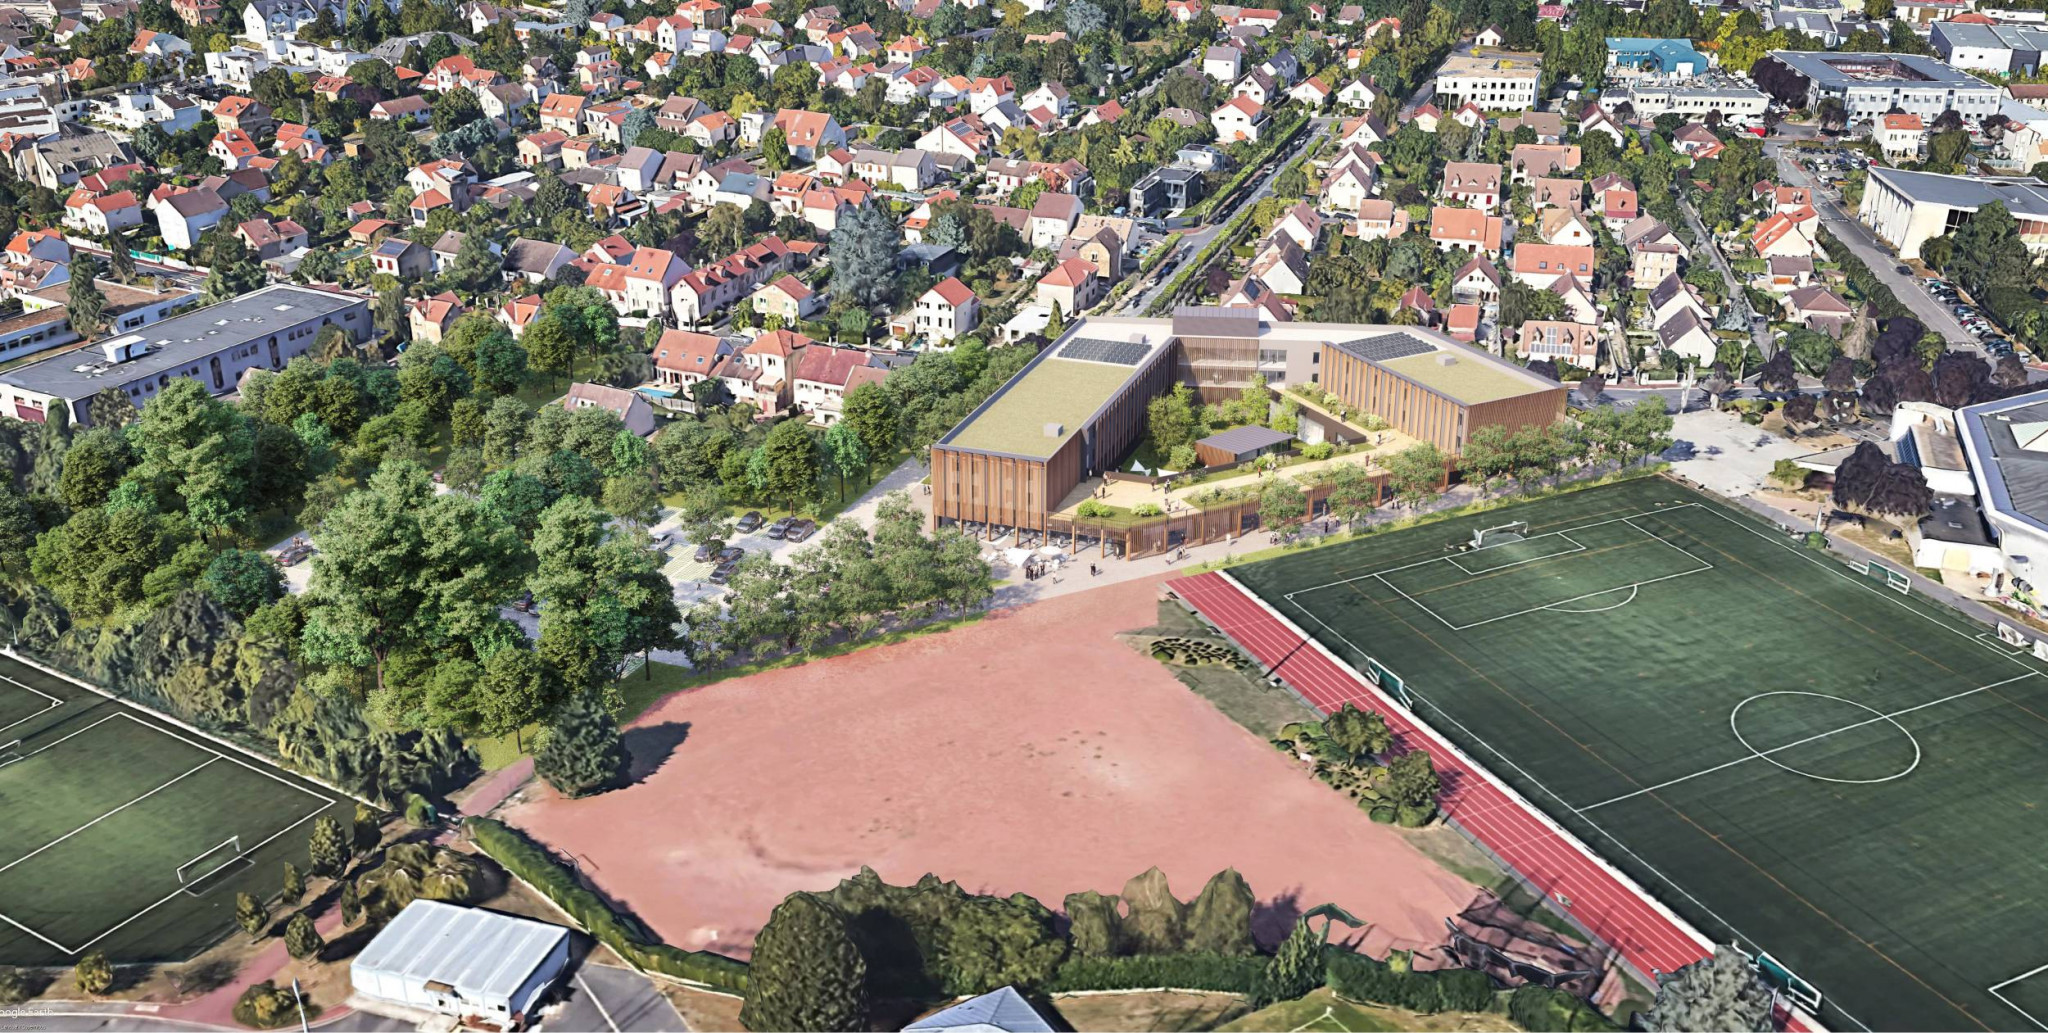 United States choose Eaubonne as training base for Paris 2024 after multi-million Euro redevelopment approved